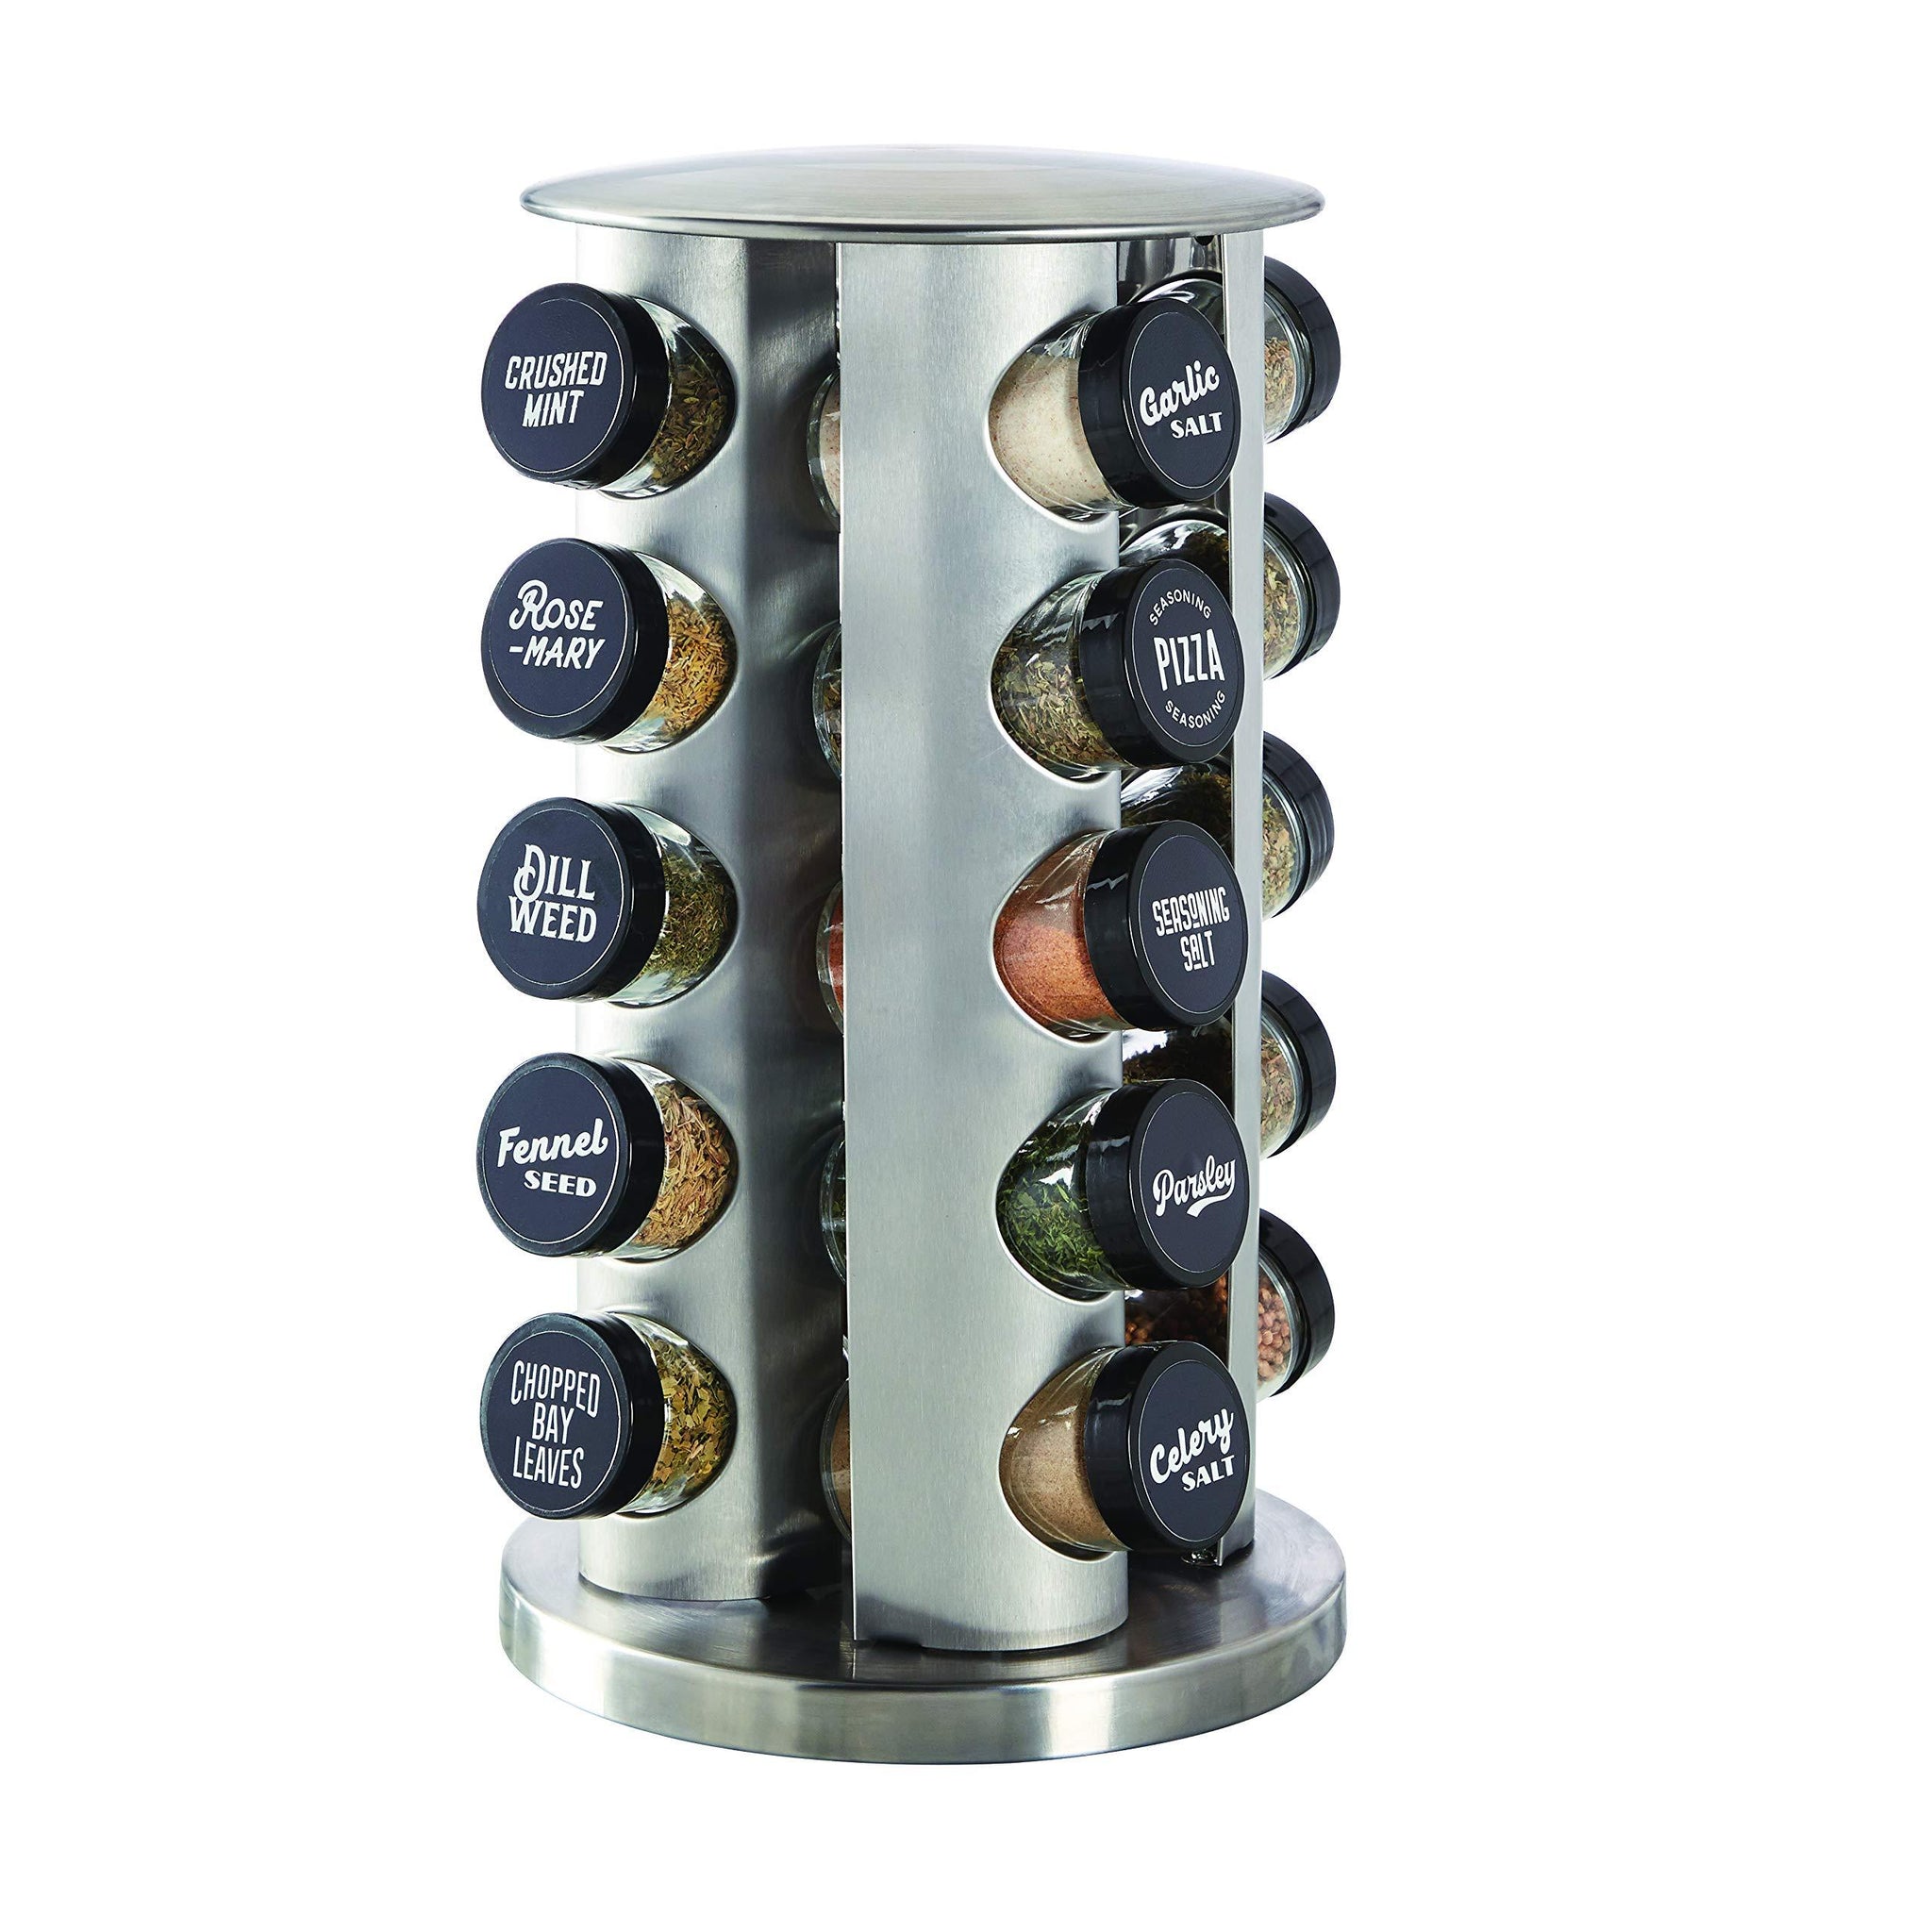 Kamenstein 5244684 Revolving 20-Jar Countertop Rack Tower Organizer with Black Caps and Free Spice Refills for 5 Years, Count, Silver